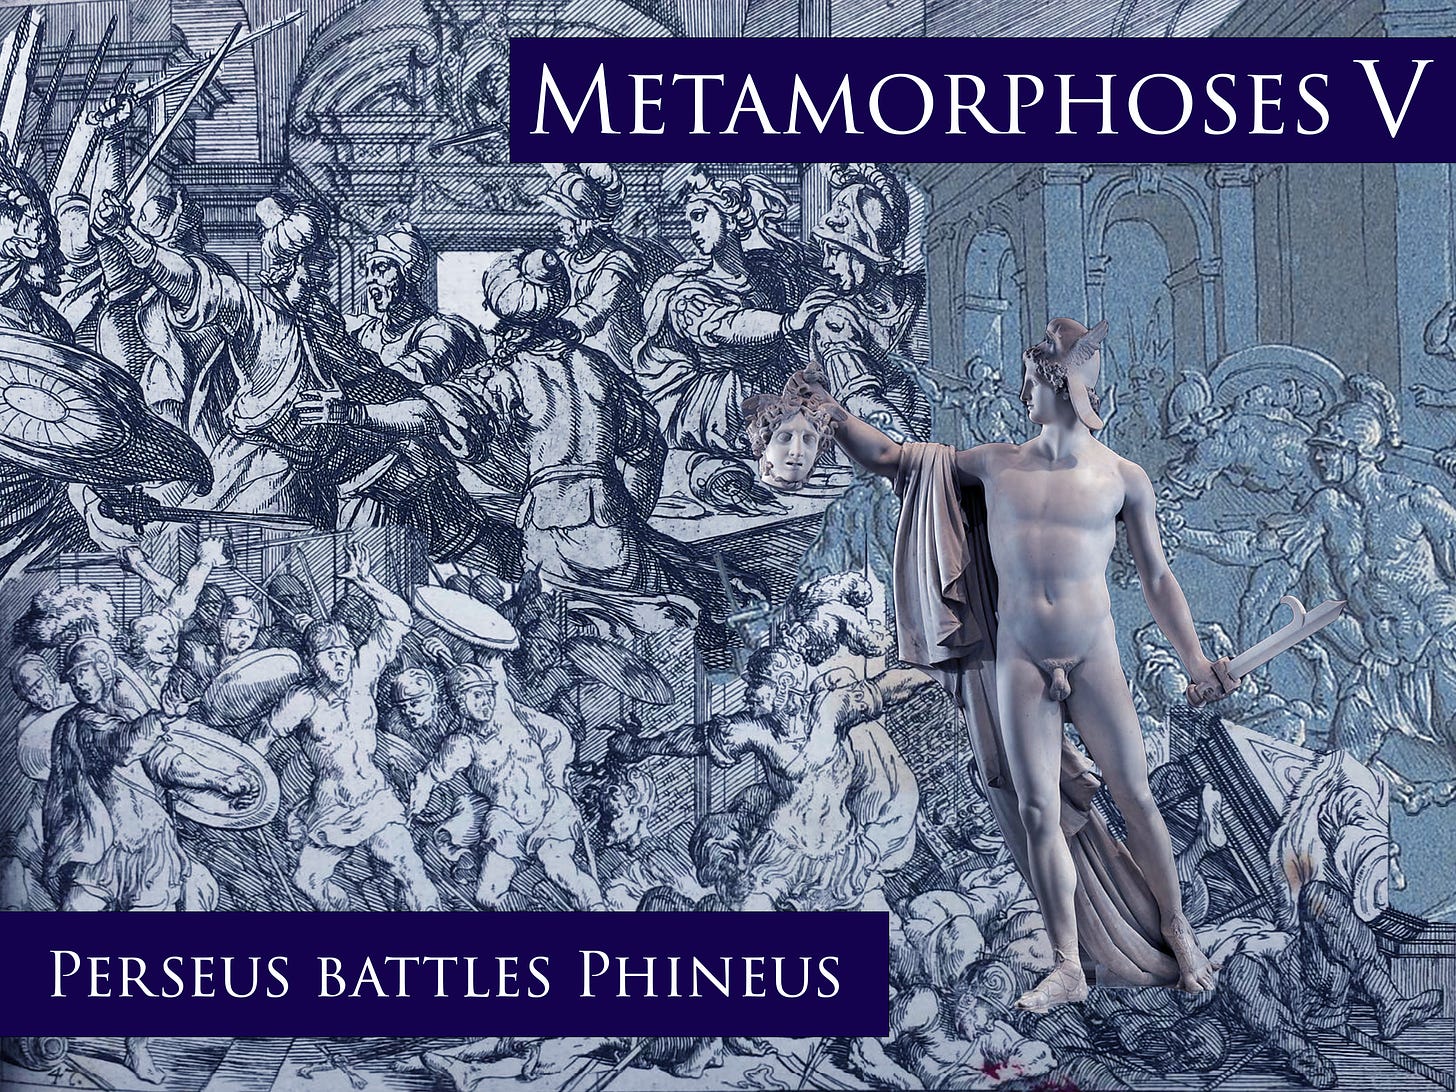 dark blue background of collaged engravings of Perseus (the greek Hero) fighting Phineus (his rival for Andromeda's hand in marriage) and turning him and his men to stone with Medusa's head. Text on top right: "Metamorphoses V". Text on bottom left: "Perseus battles Phineus" 